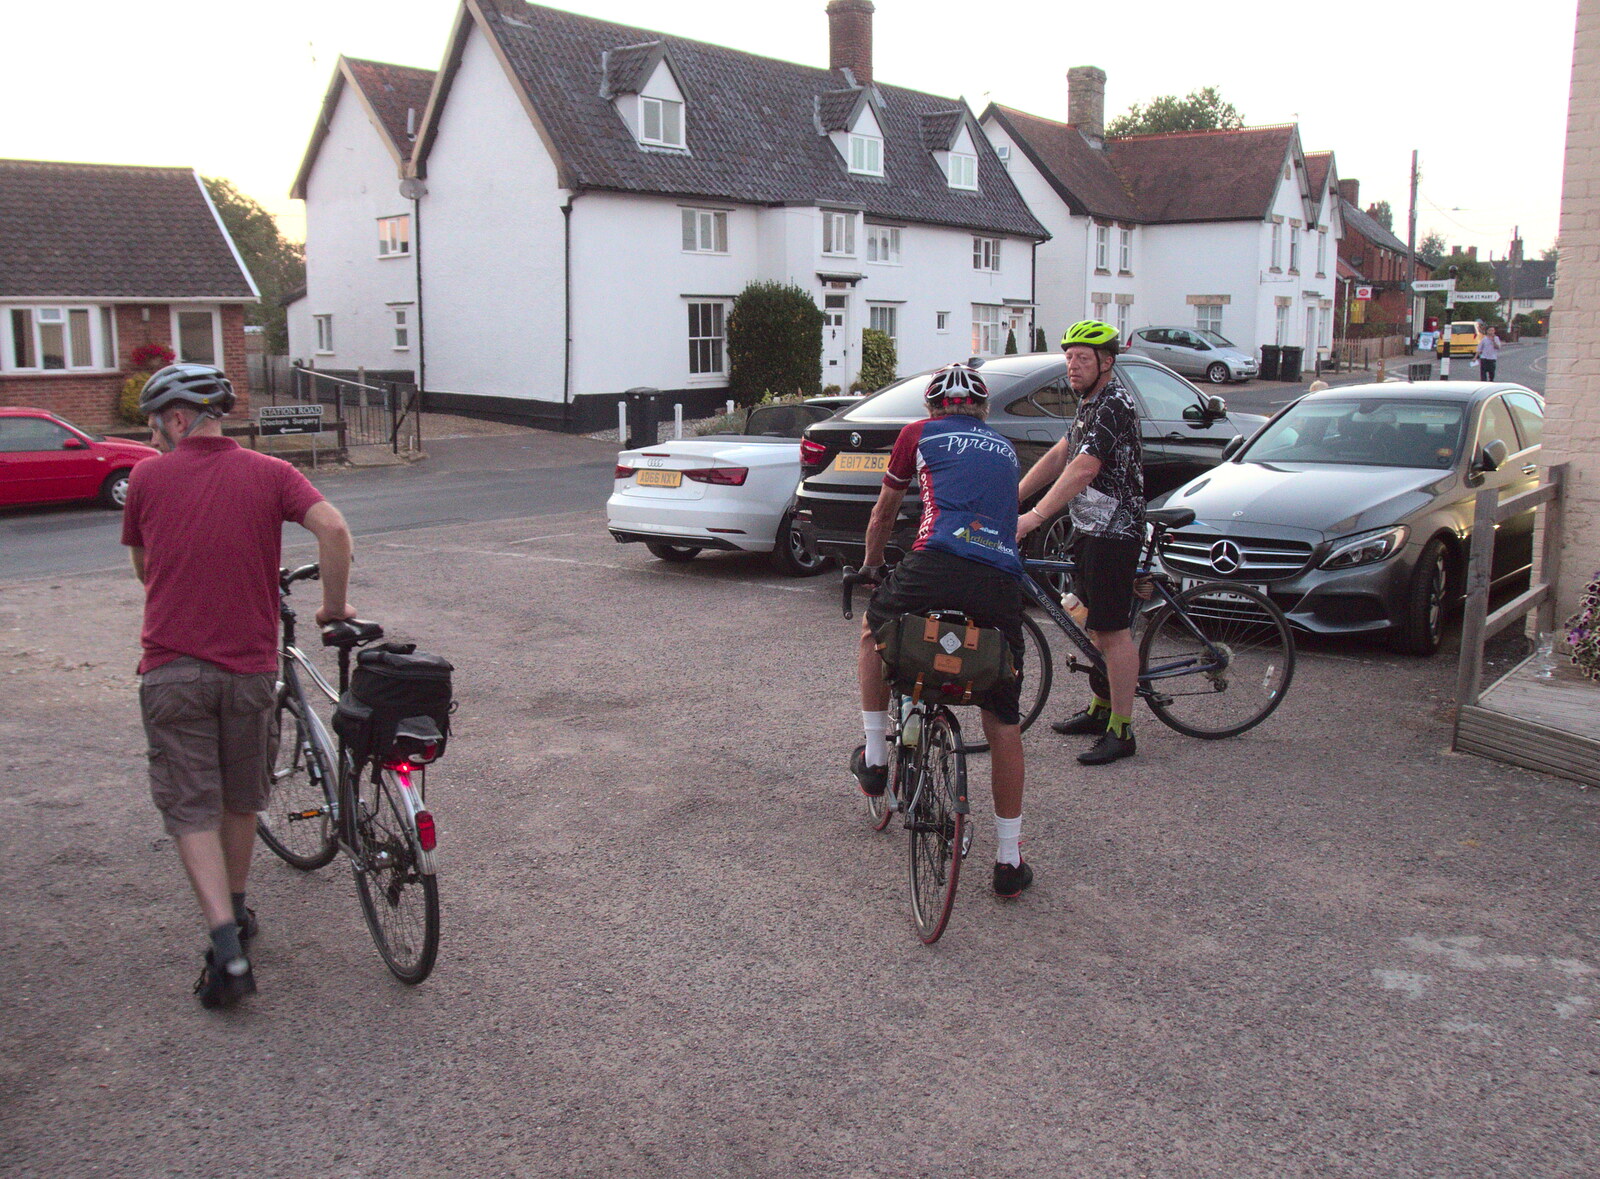 We head off from the Pulham Crown from The BSCC at The Crown and Hot Summer Days, Diss, Pulham and London - 24th July 2018